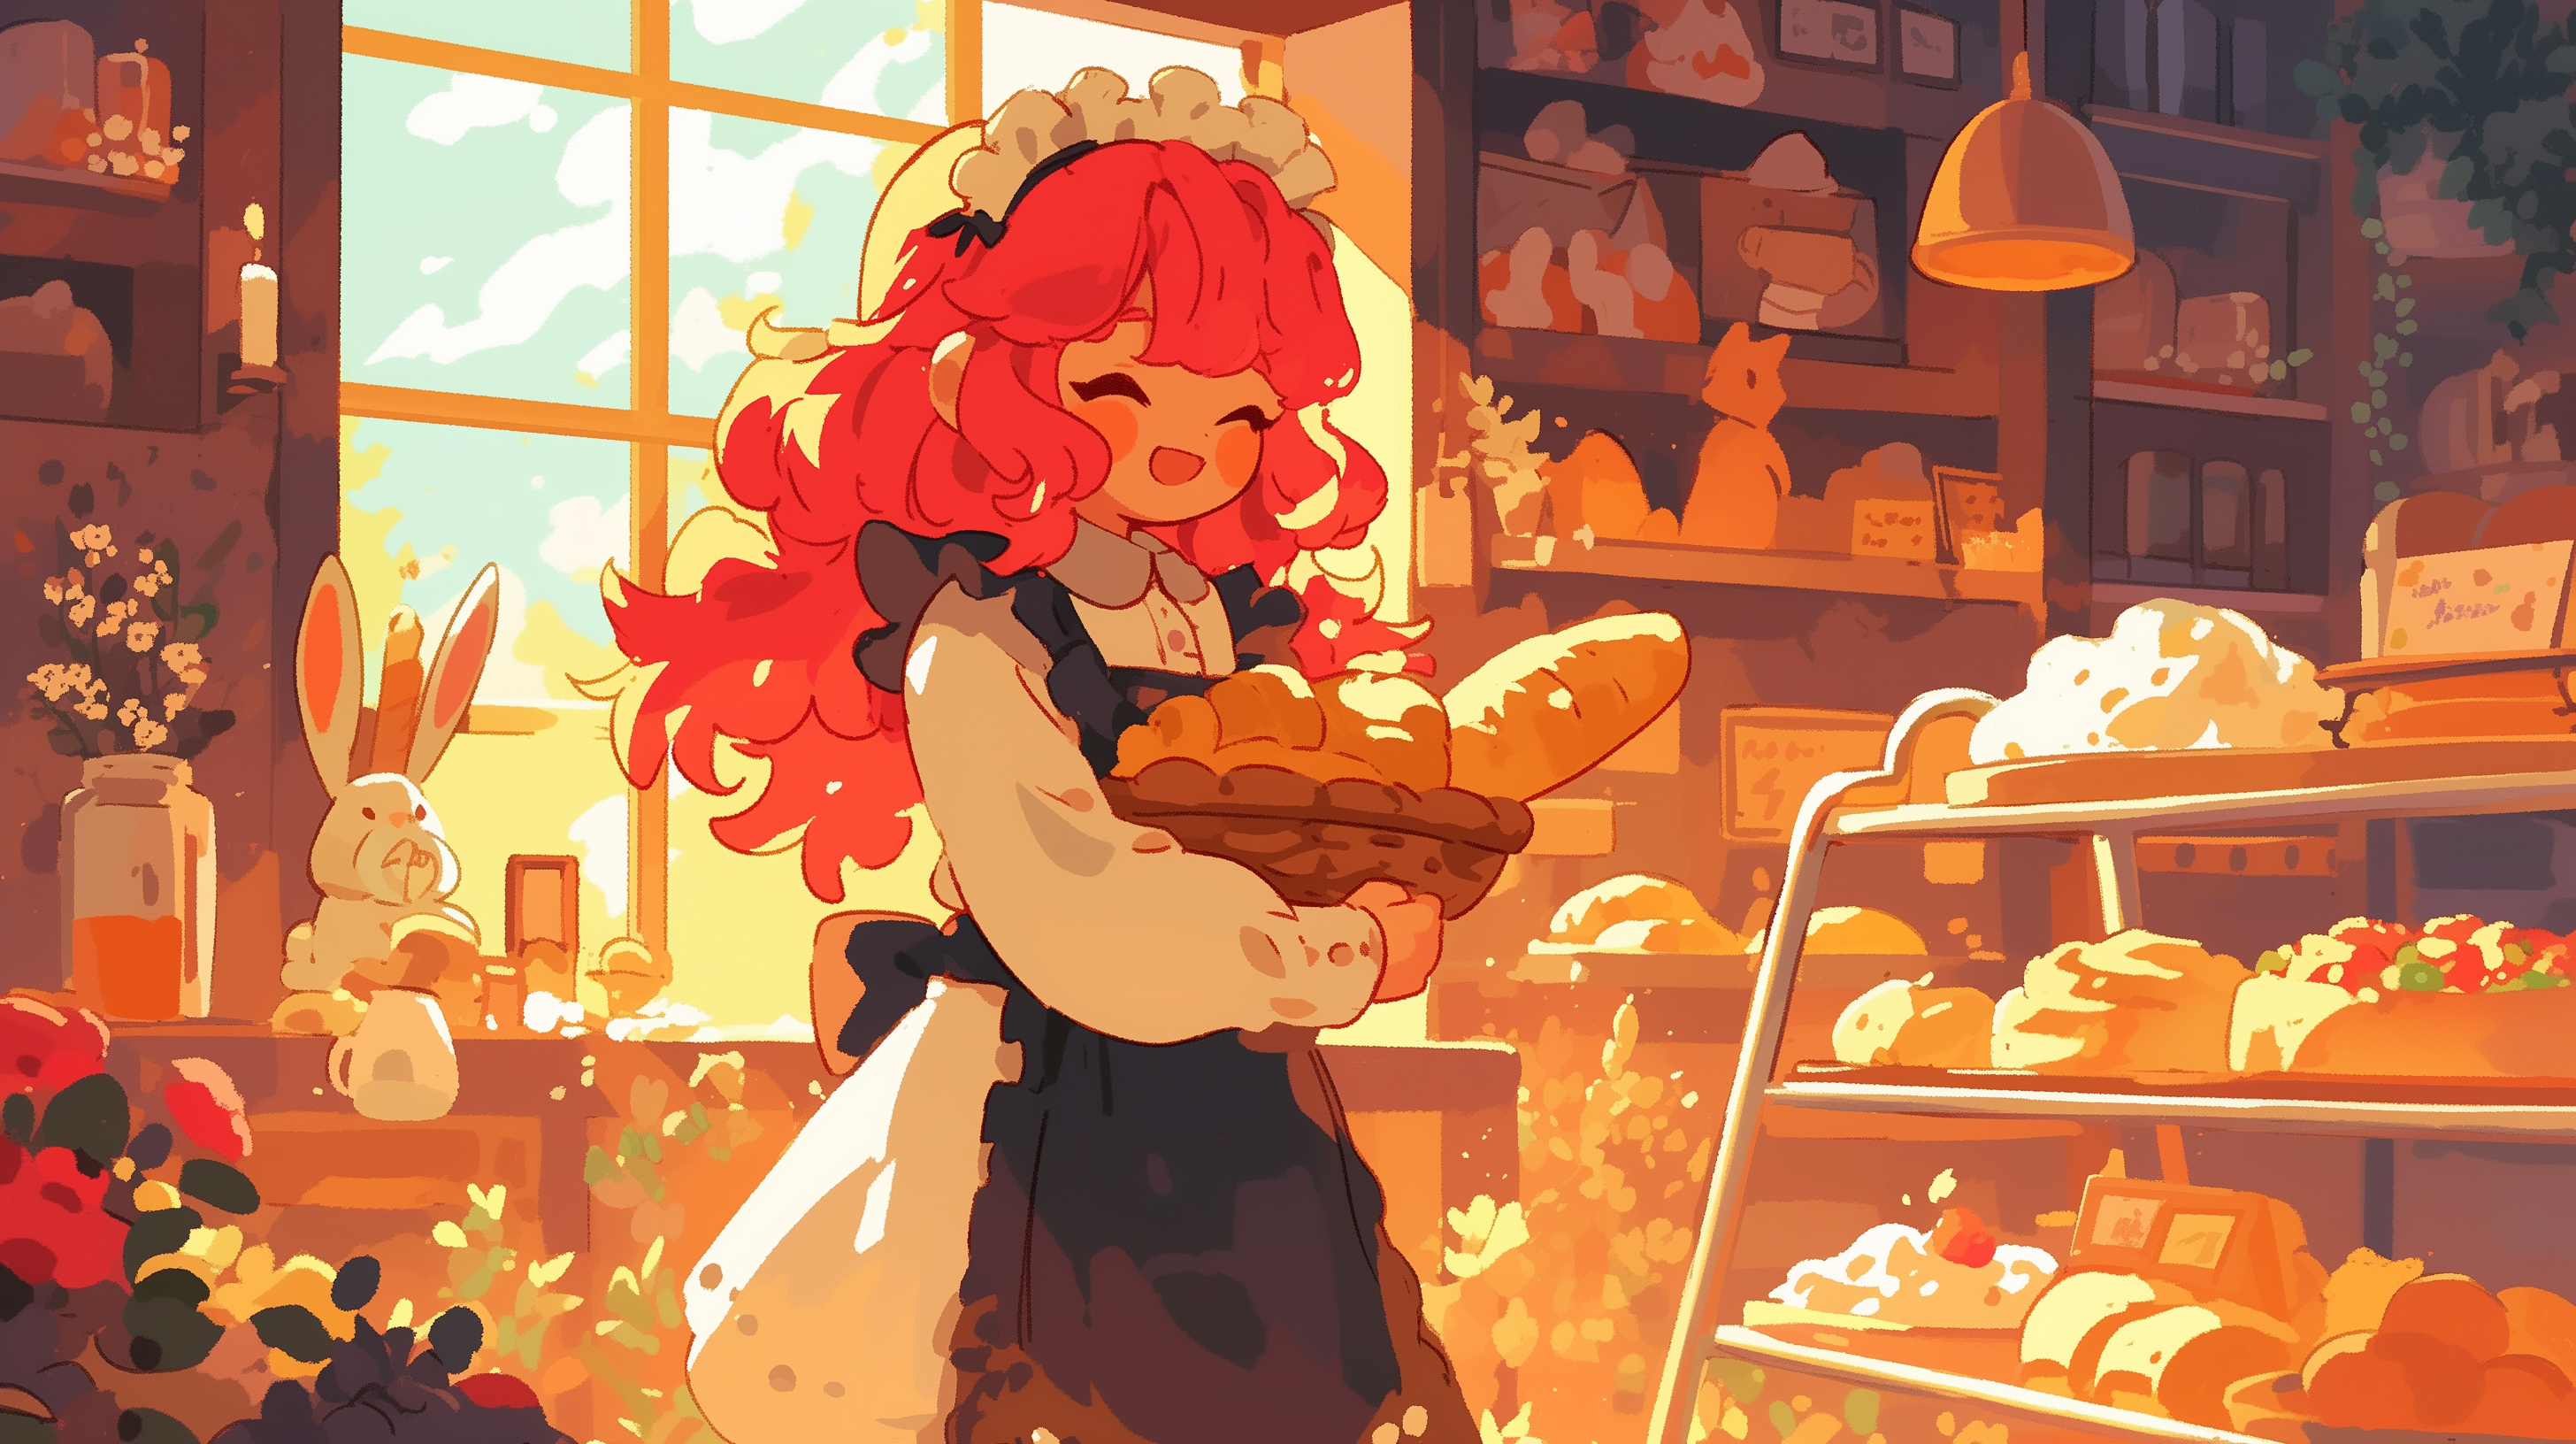 AI Art Generator: Anime girl as a professional baker in a bakery.